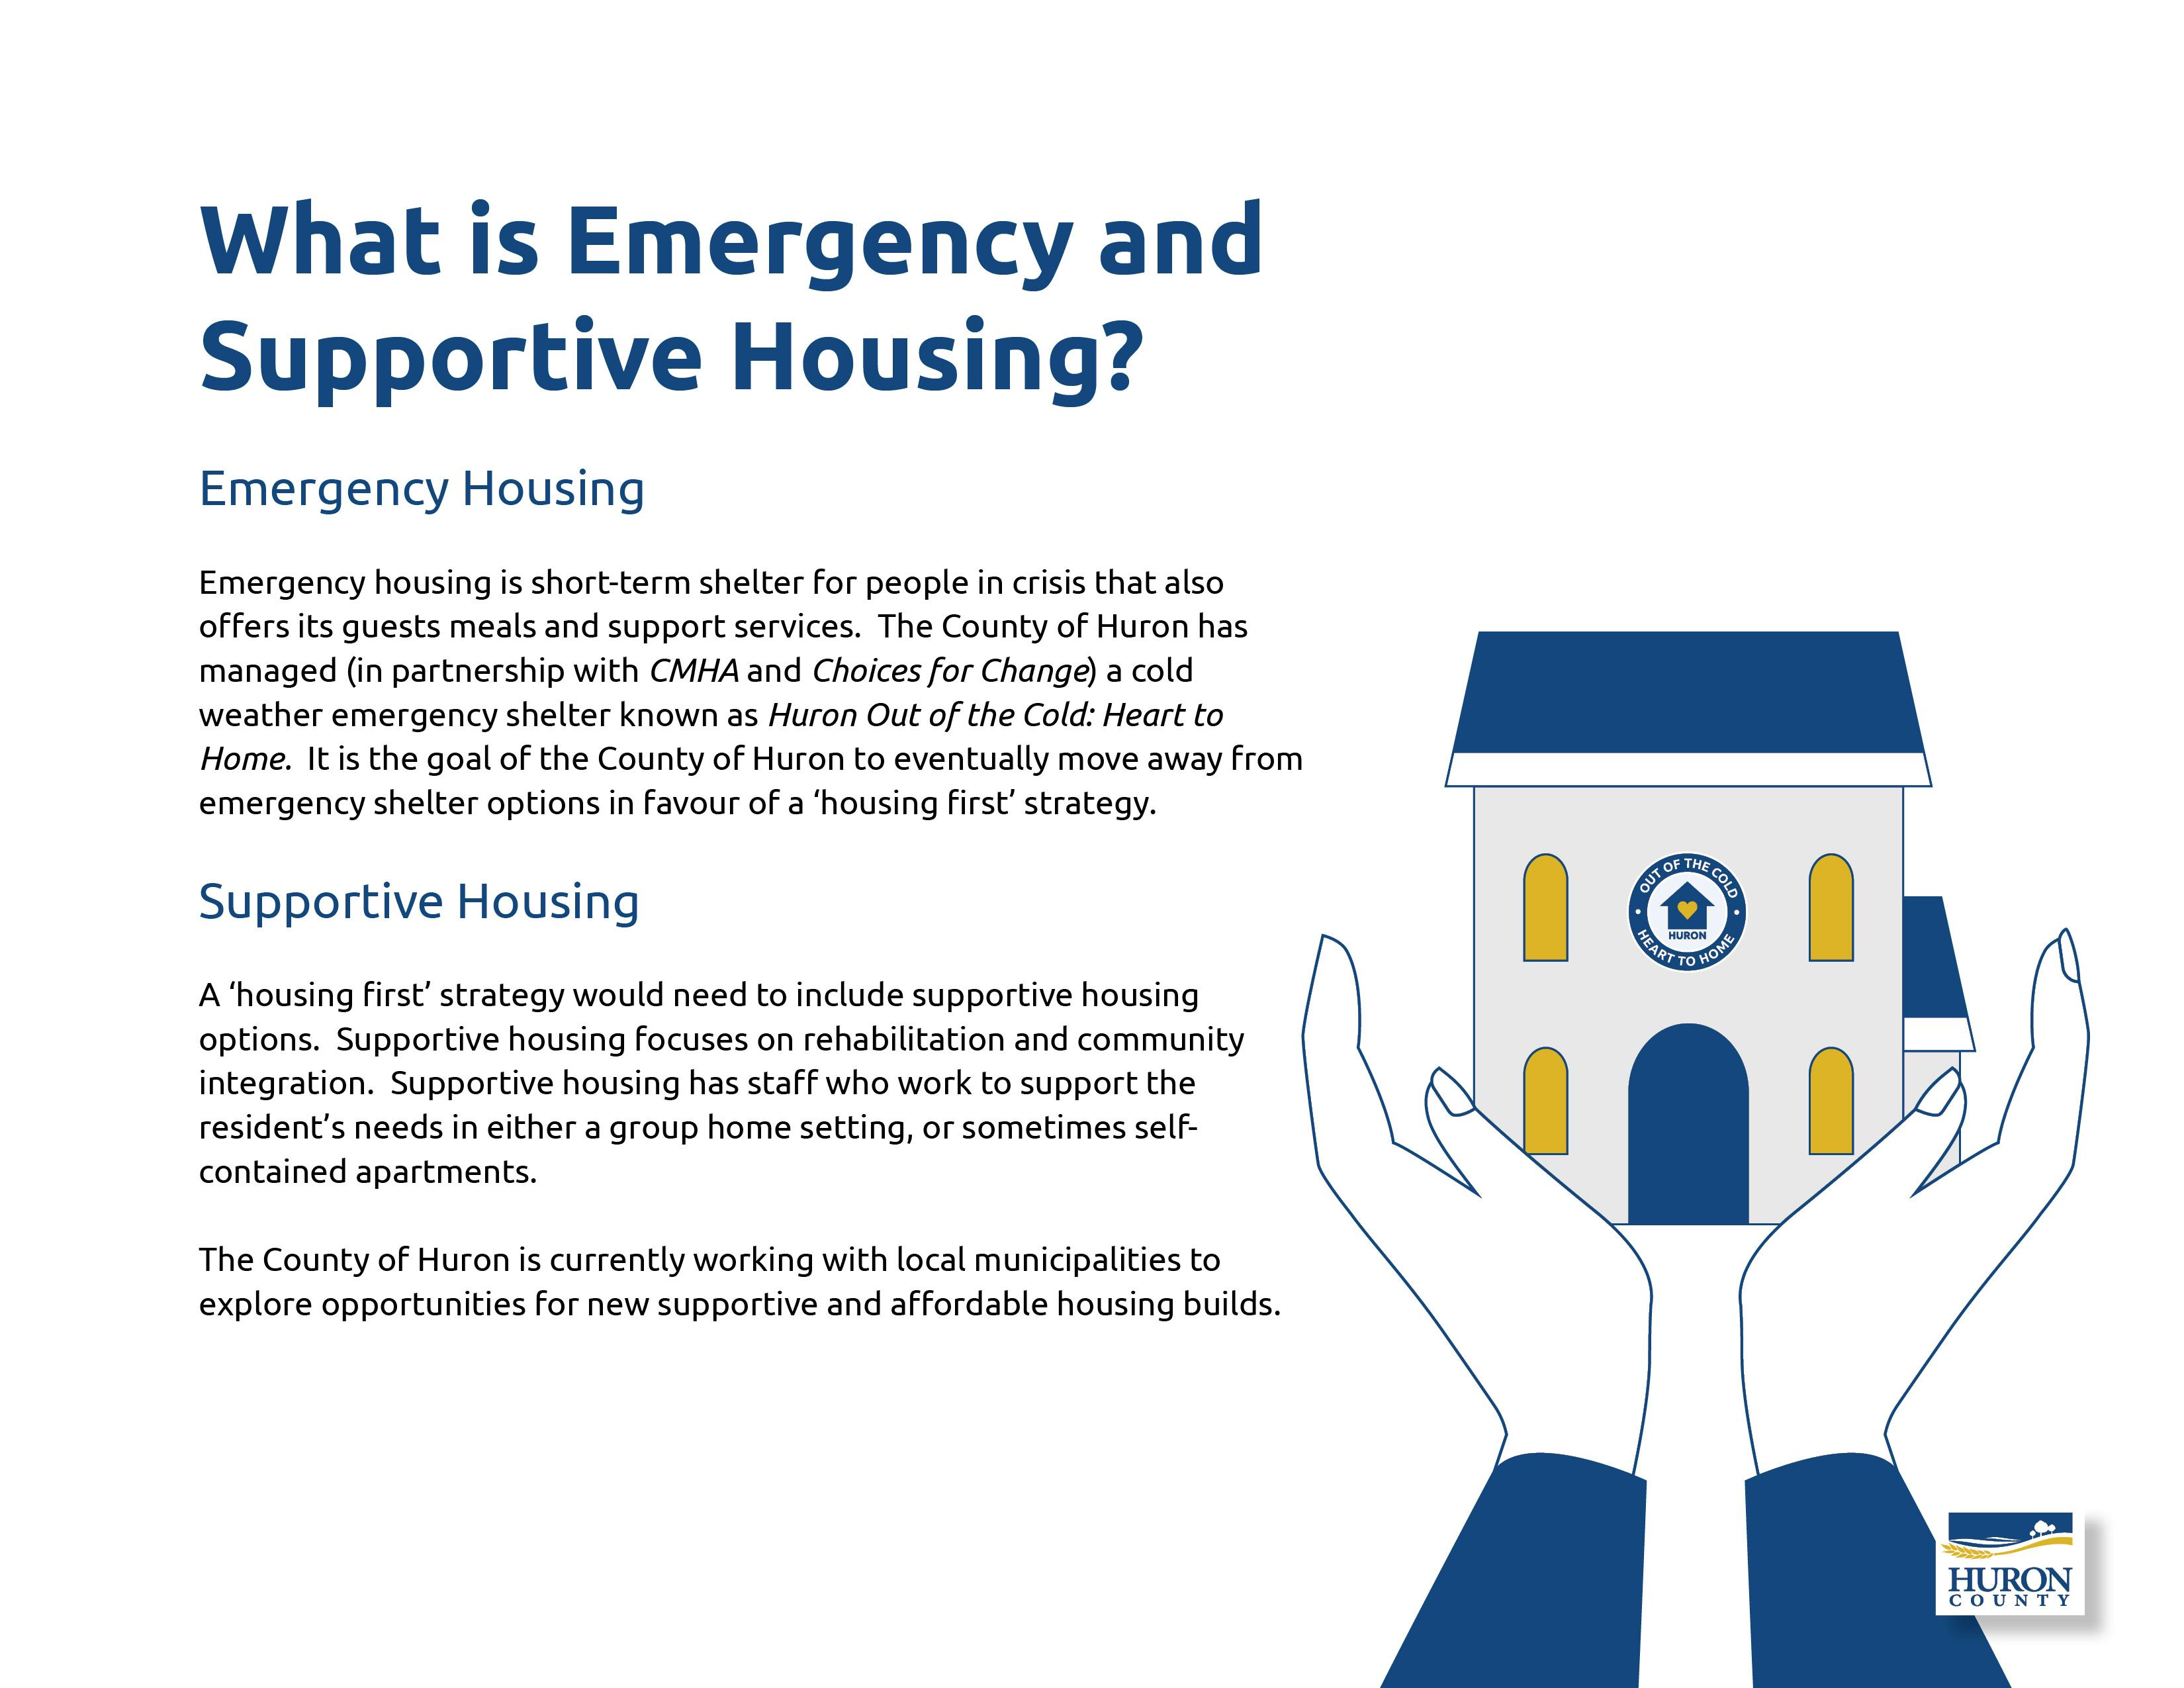 Emergency and Supportive Housing